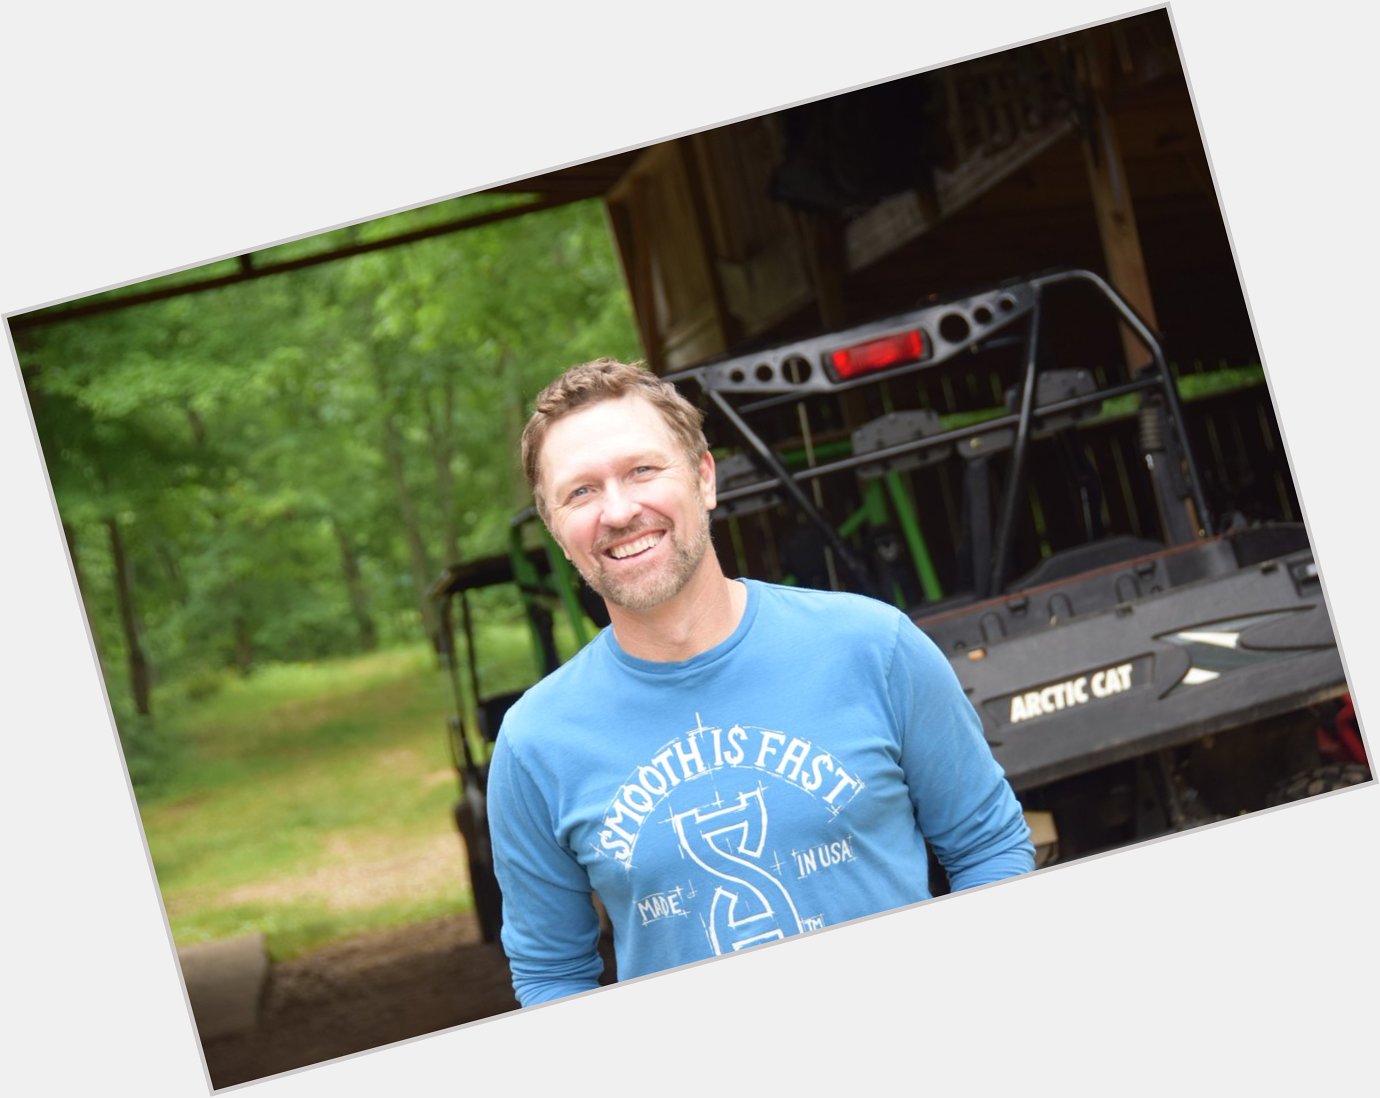 Happy birthday to the most energetic 53-year-old on the planet, Craig Morgan, 